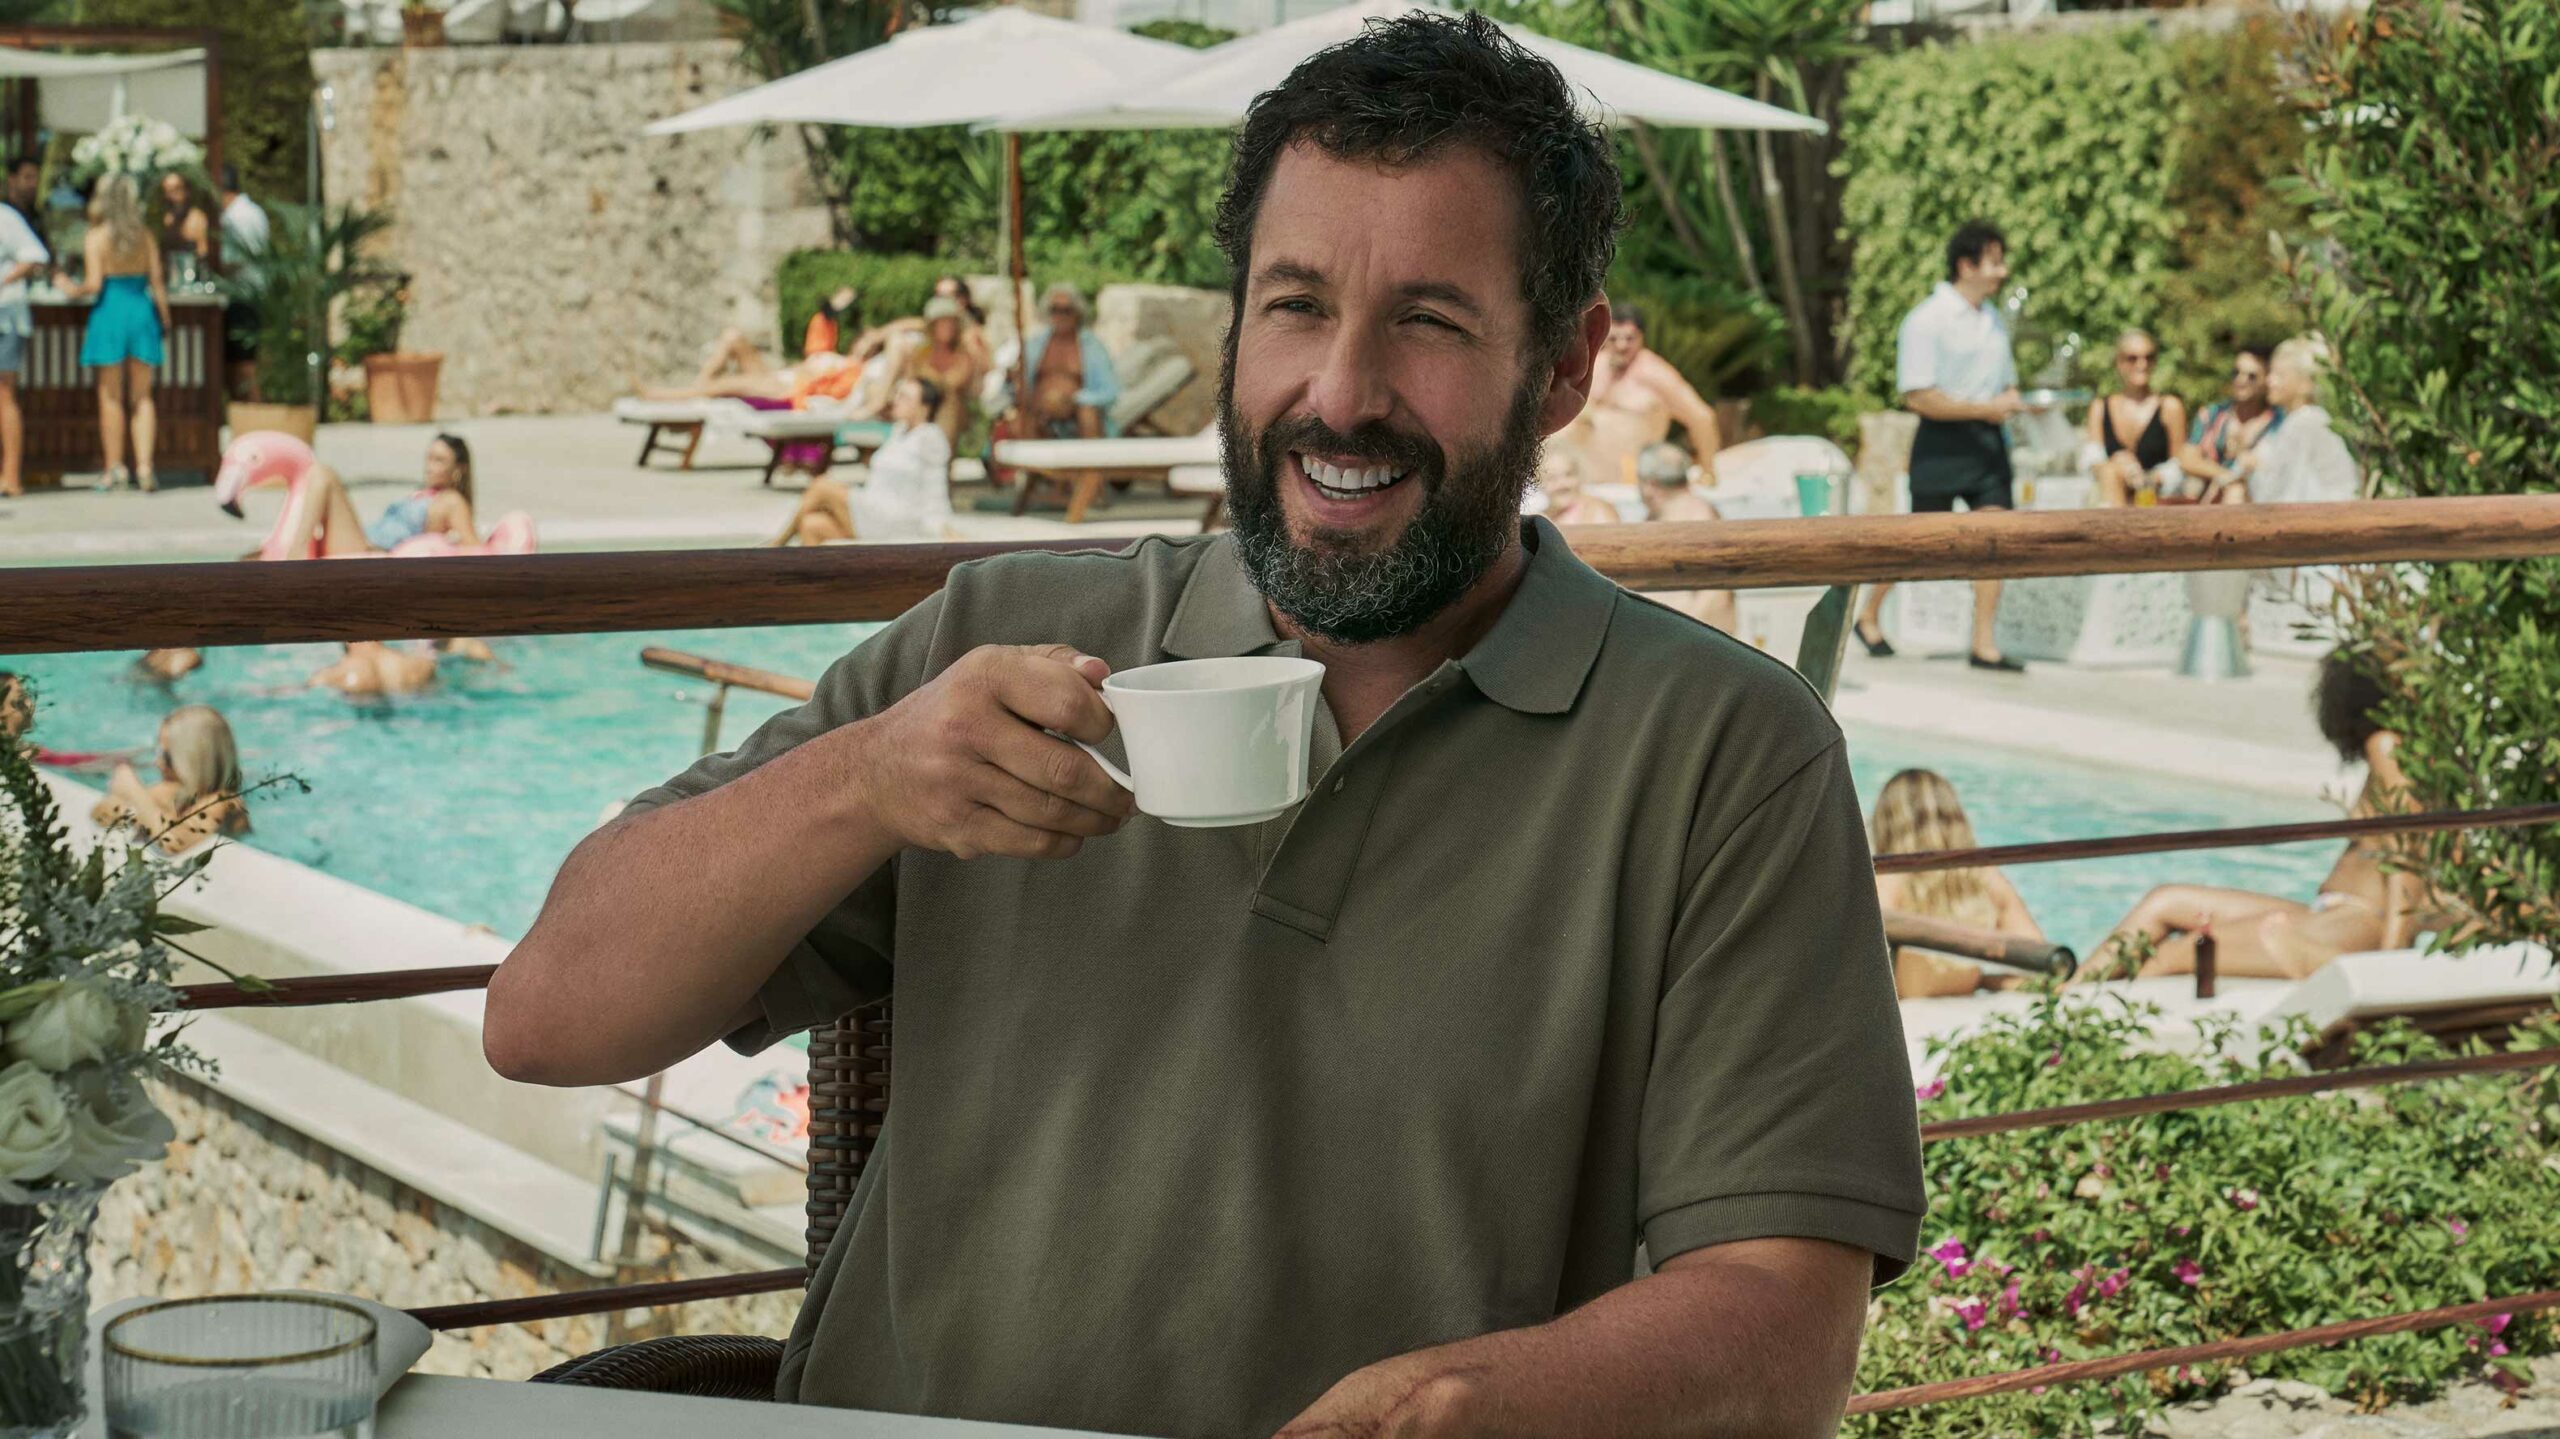 Adam Sandler drinking a coffee and laughing in Netflix's Hustle